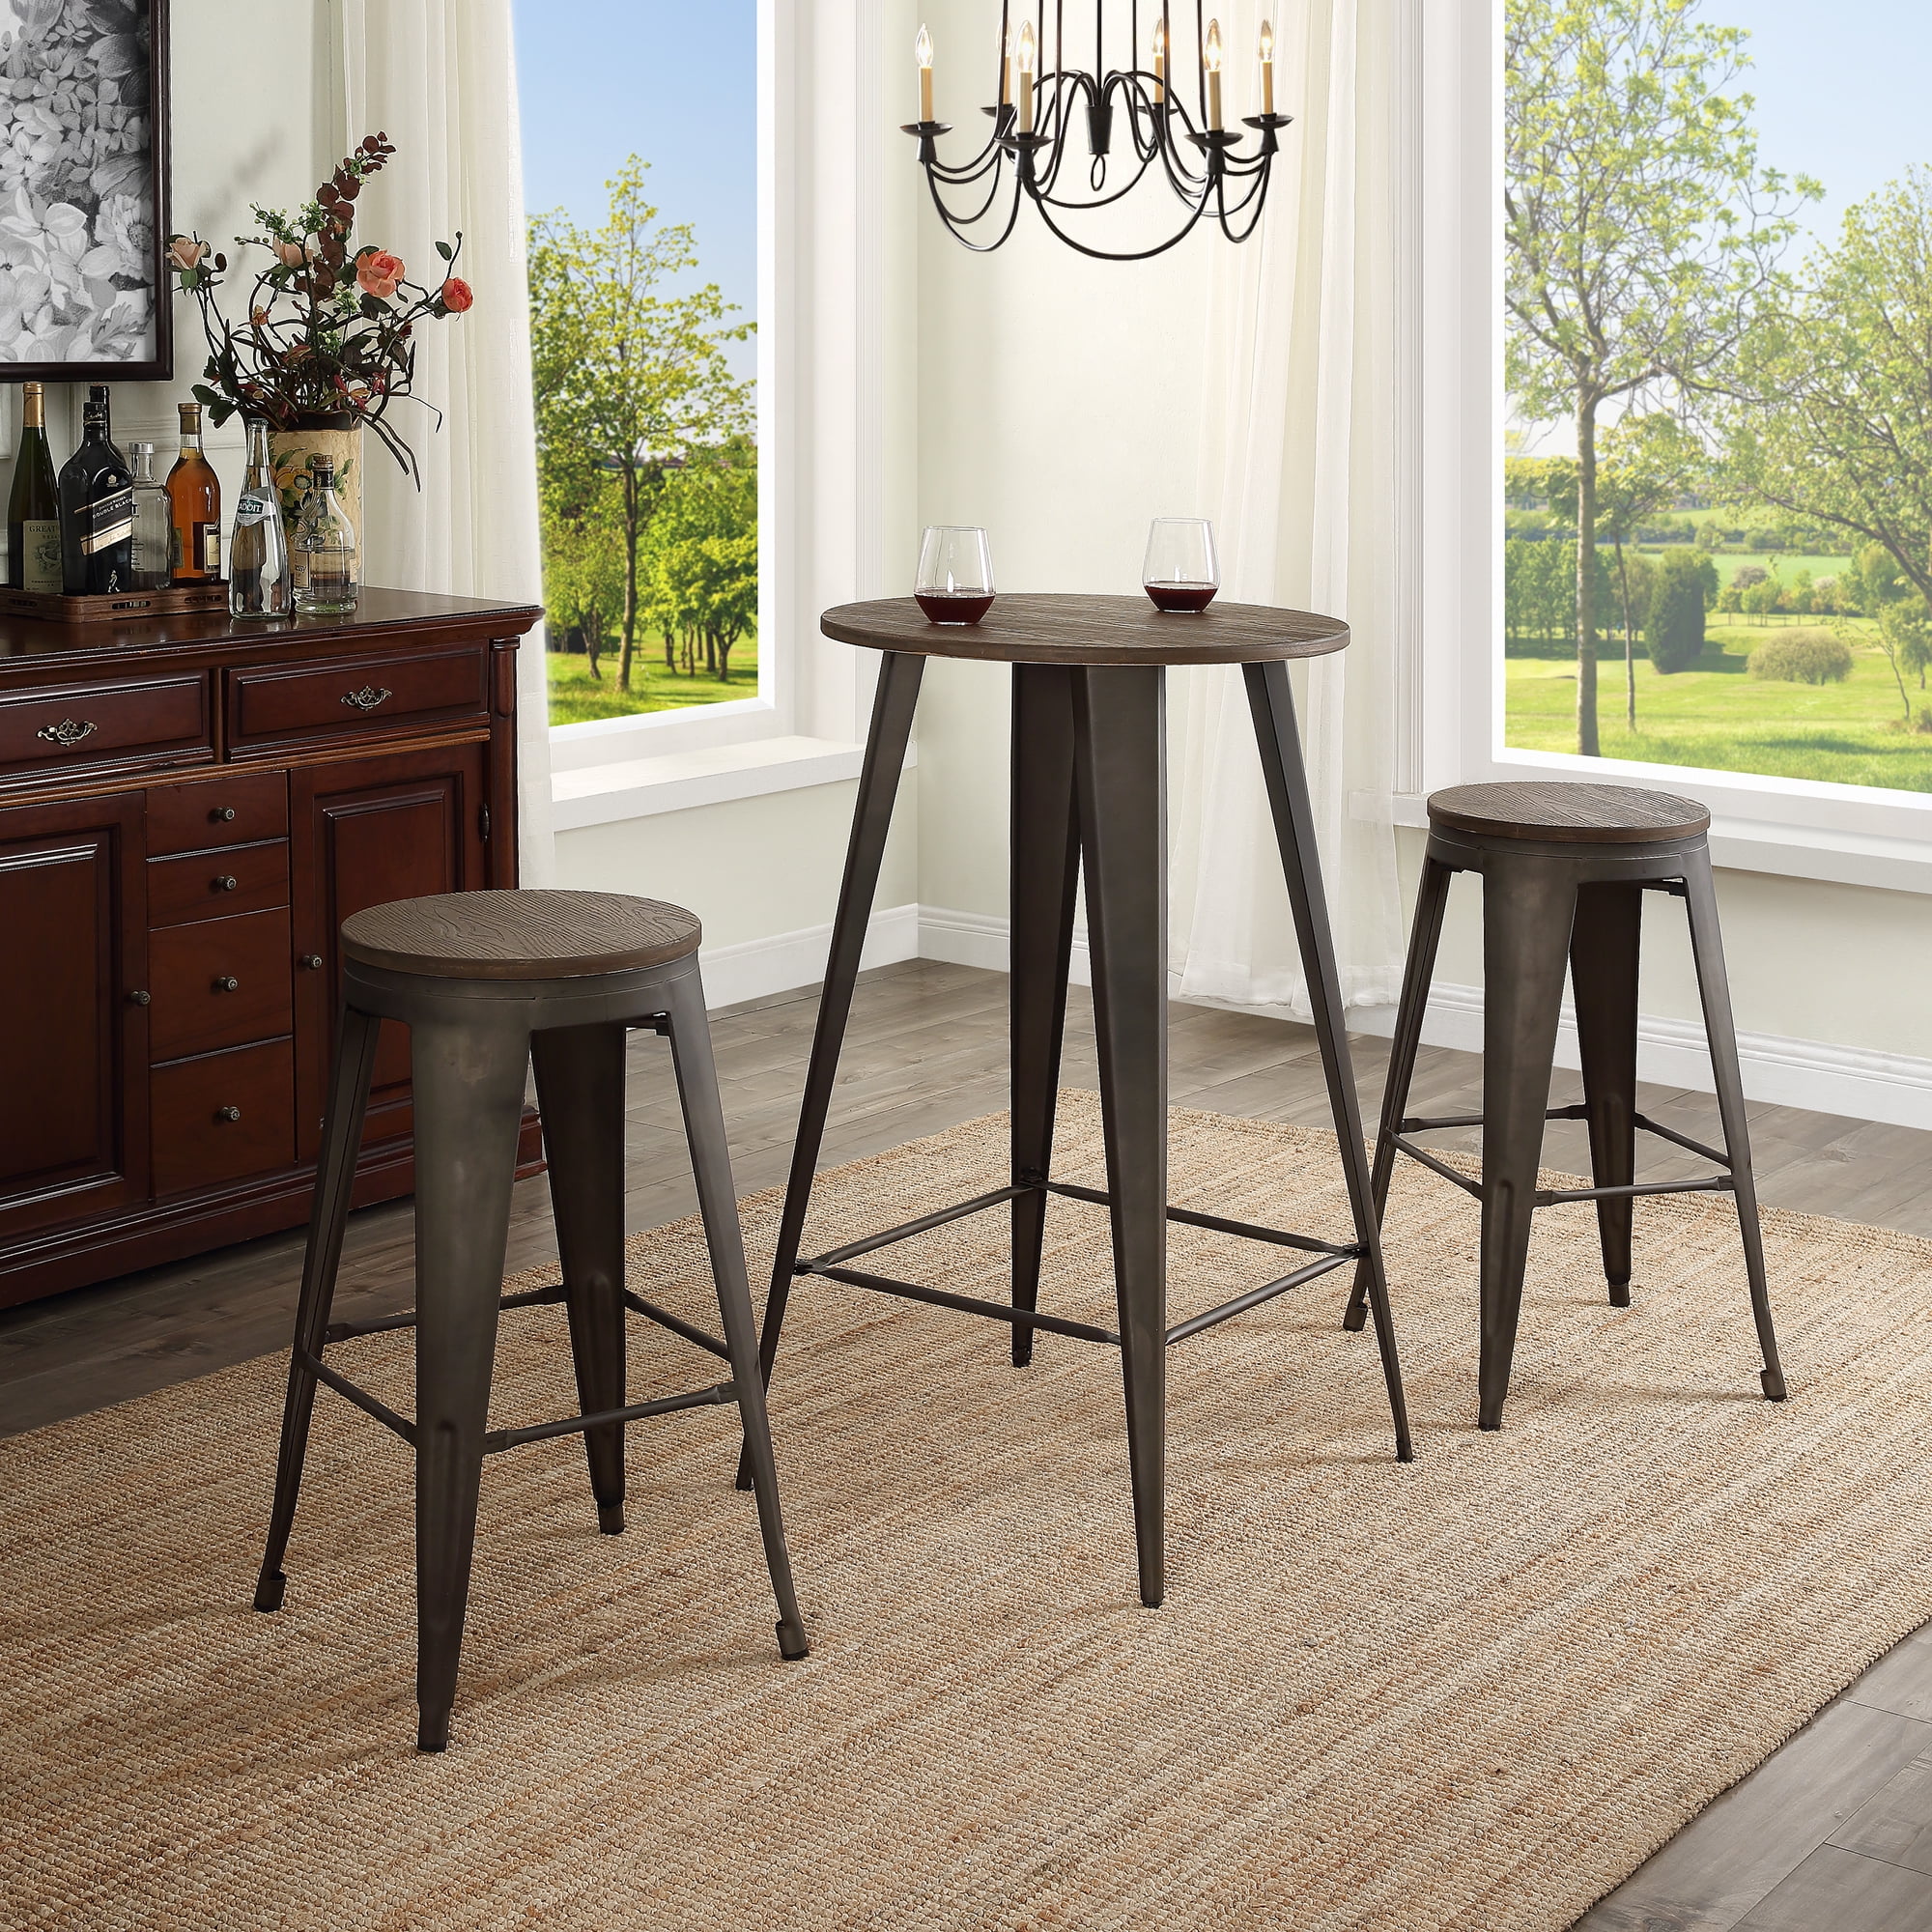 Dining Table Set With 2 Bar Stools, Bar Stool Table Set Of 2